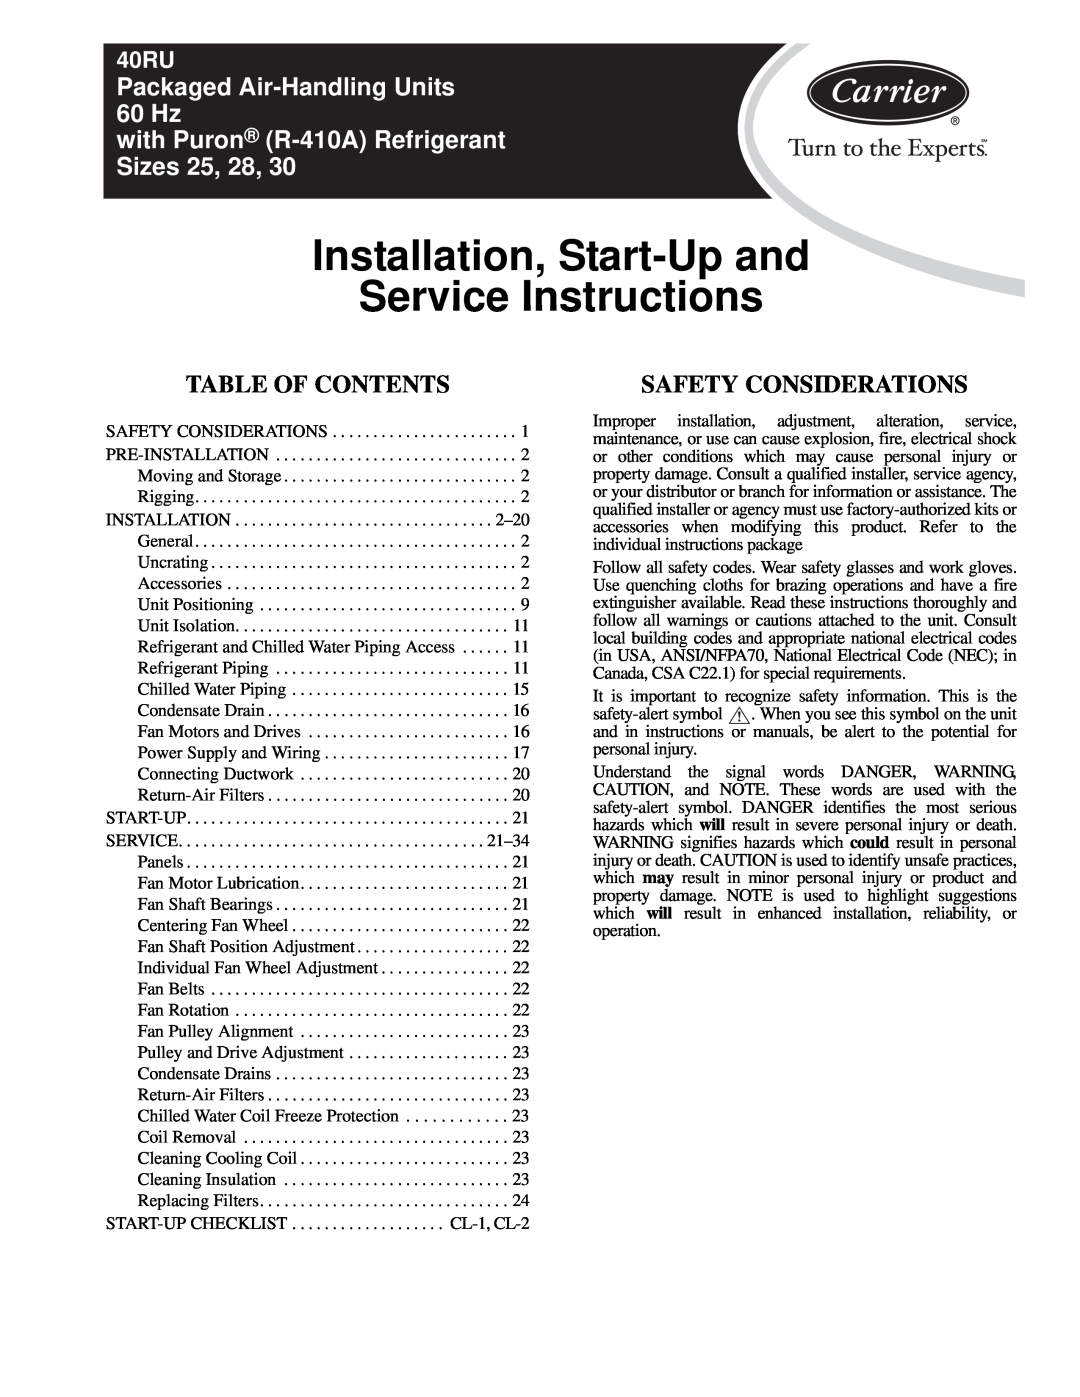 Carrier R-410A manual Table Of Contents, Safety Considerations, Installation, Start-Upand Service Instructions, 40RU 